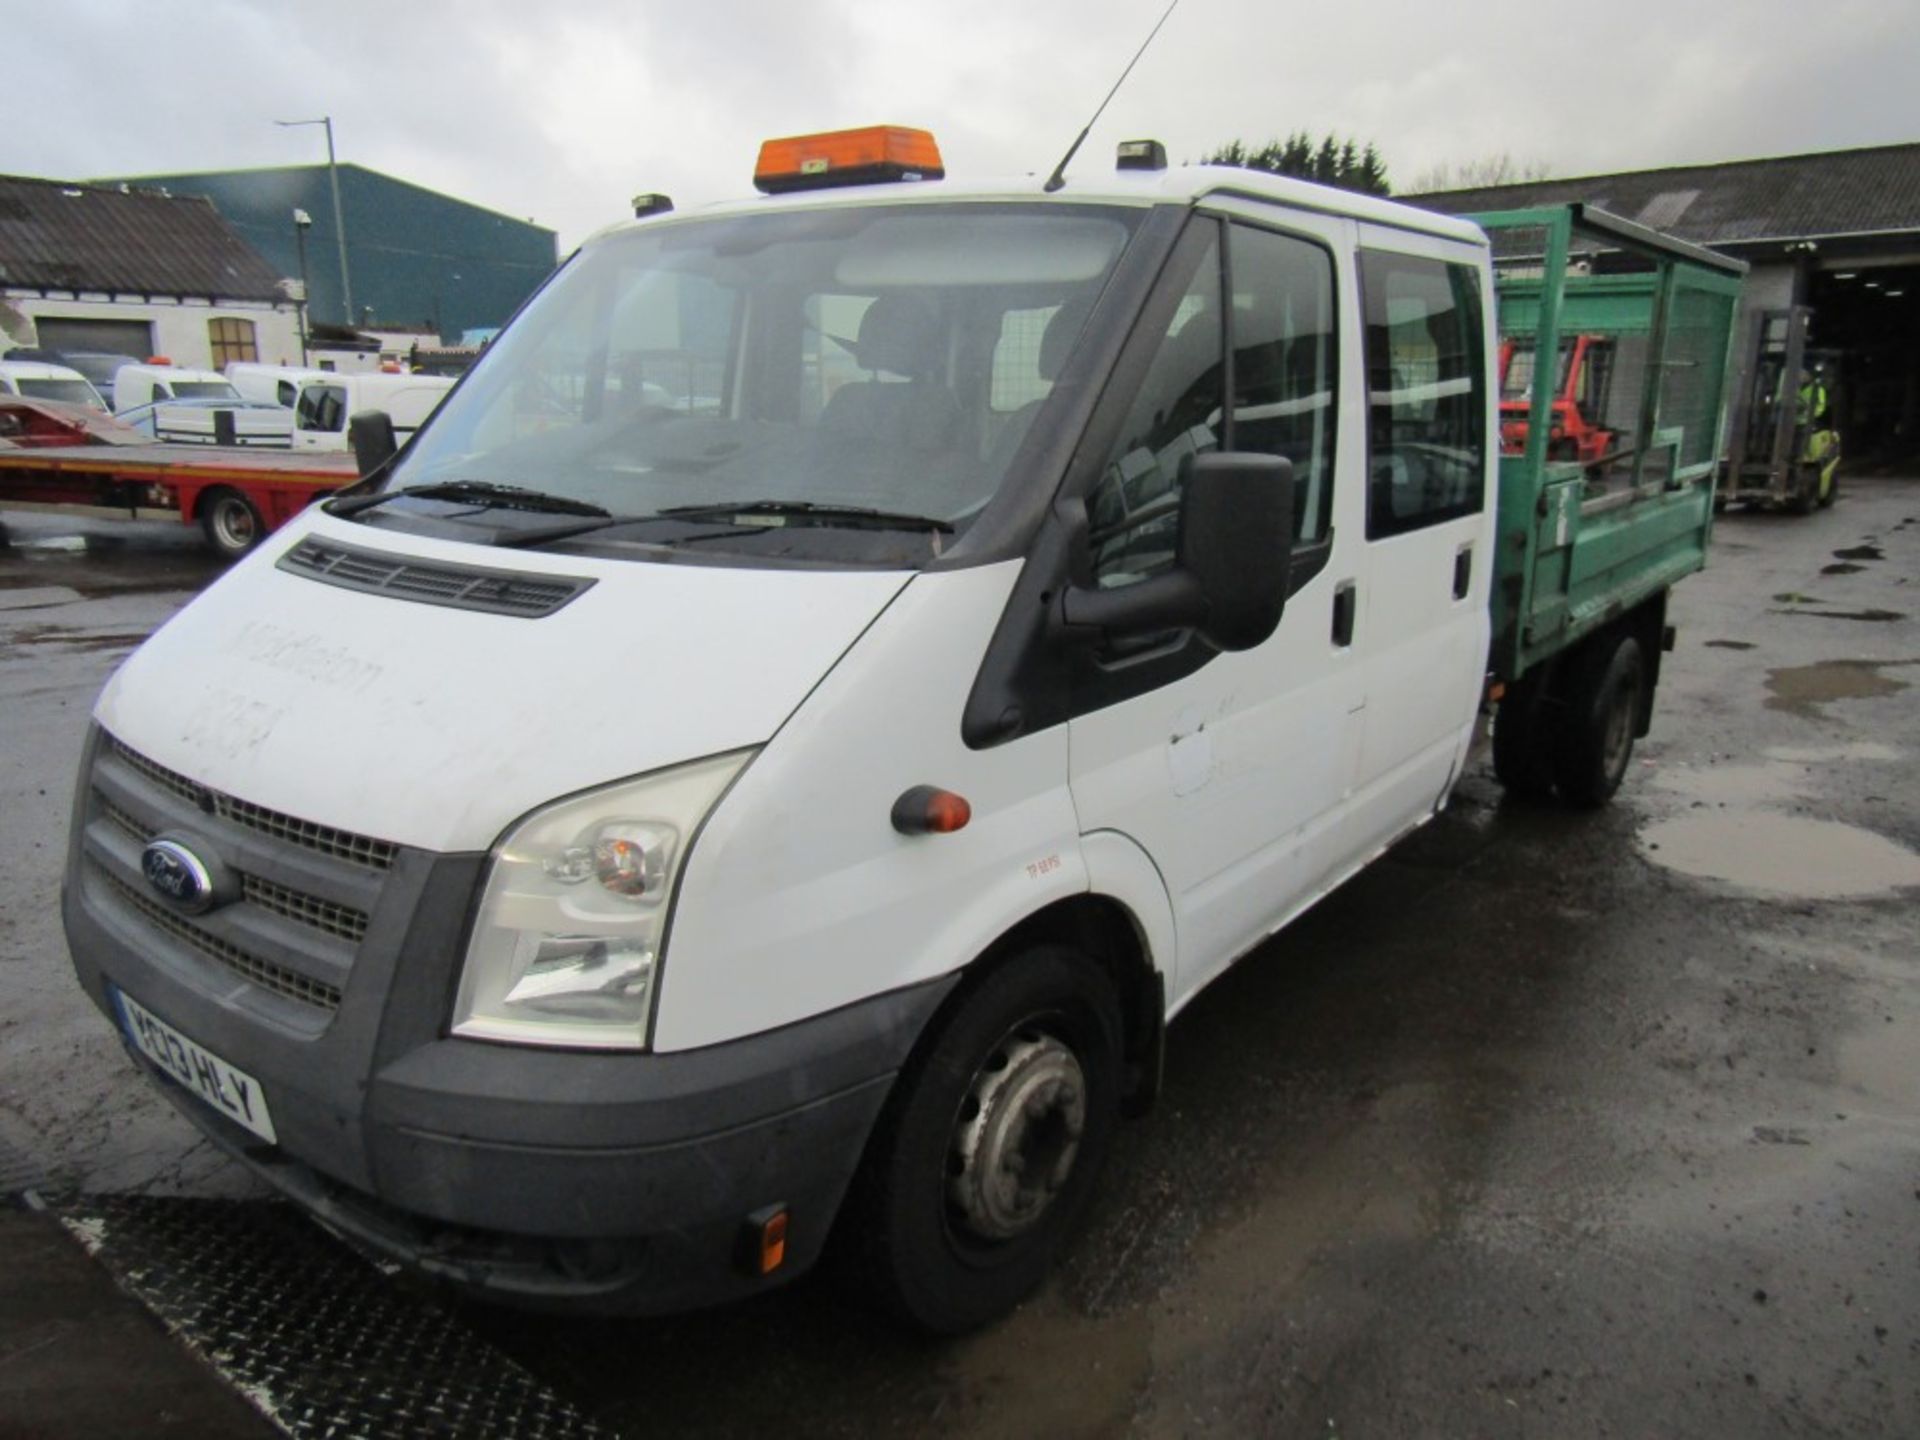 13 reg FORD TRANSIT 100 T350 RWD TIPPER (NON RUNNER) (DIRECT COUNCIL) 1ST REG 04/13, TEST 01/22, - Image 2 of 6